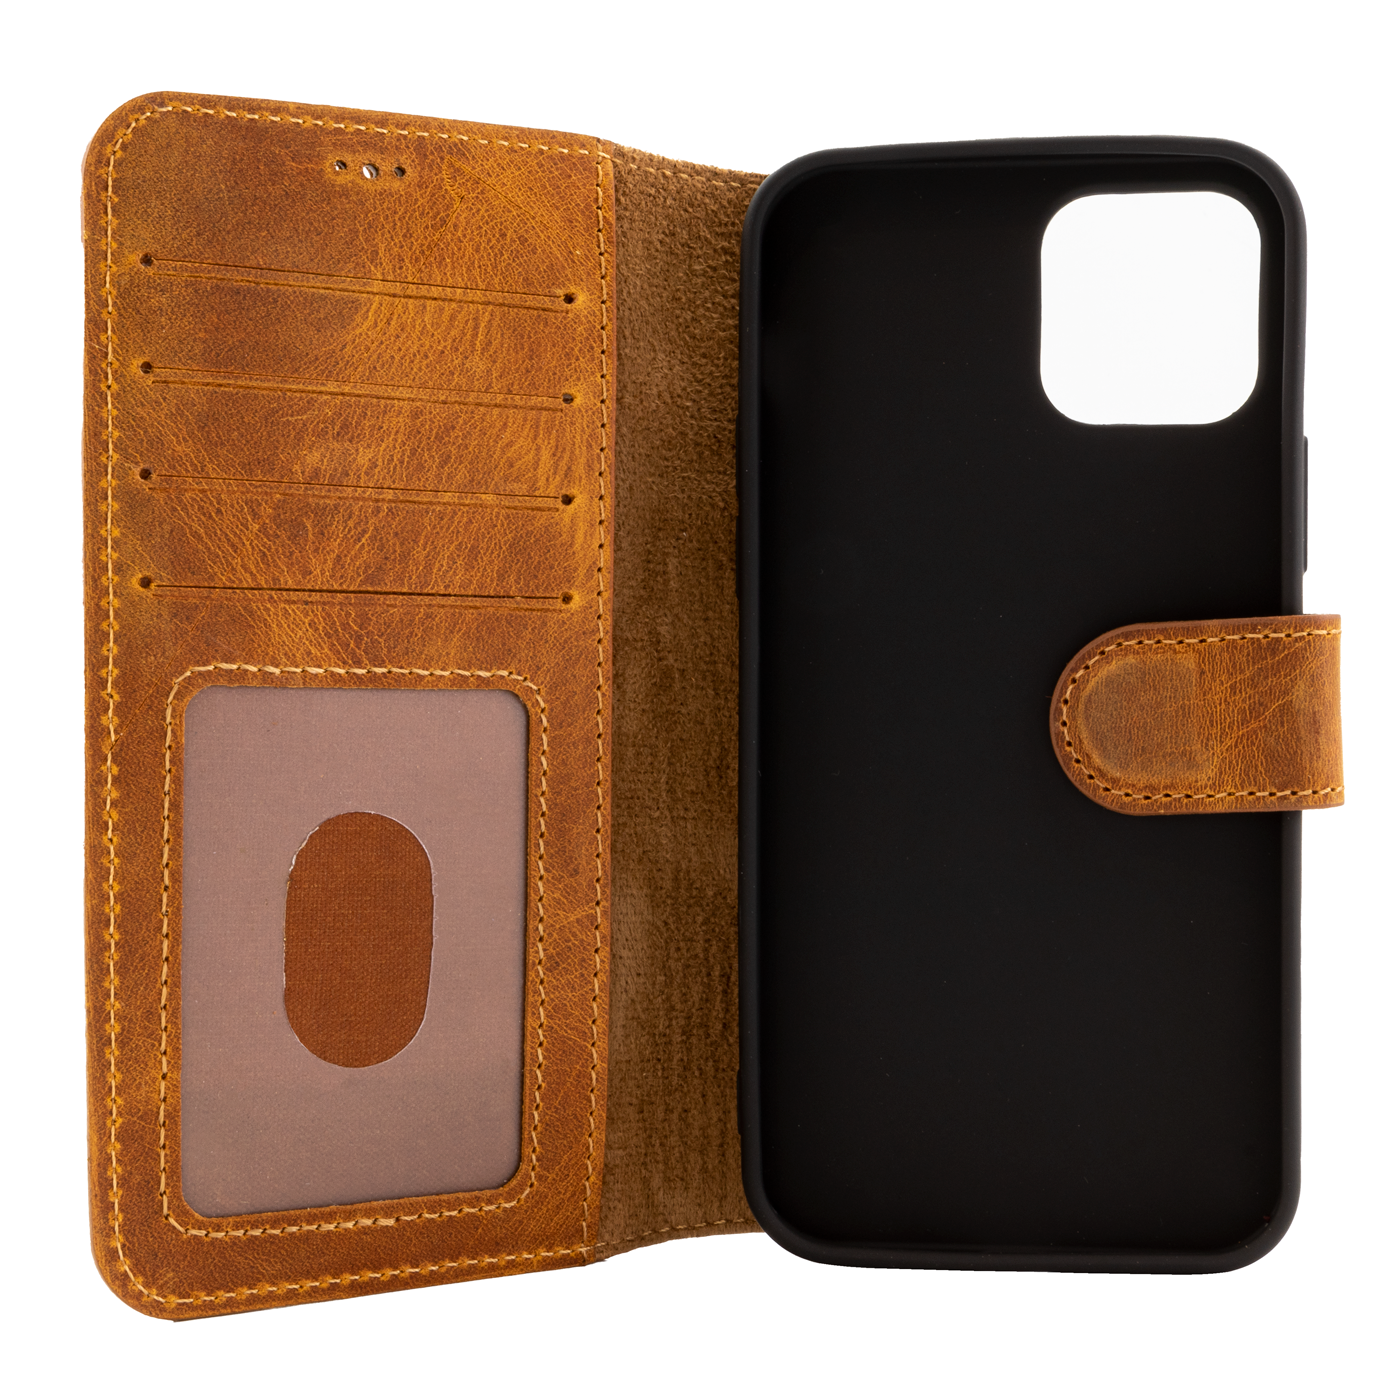 Galen Leather Co. Leather Hardback Wallet Case Iphone 12 Mini (5.4")- Crazy Horse Brown